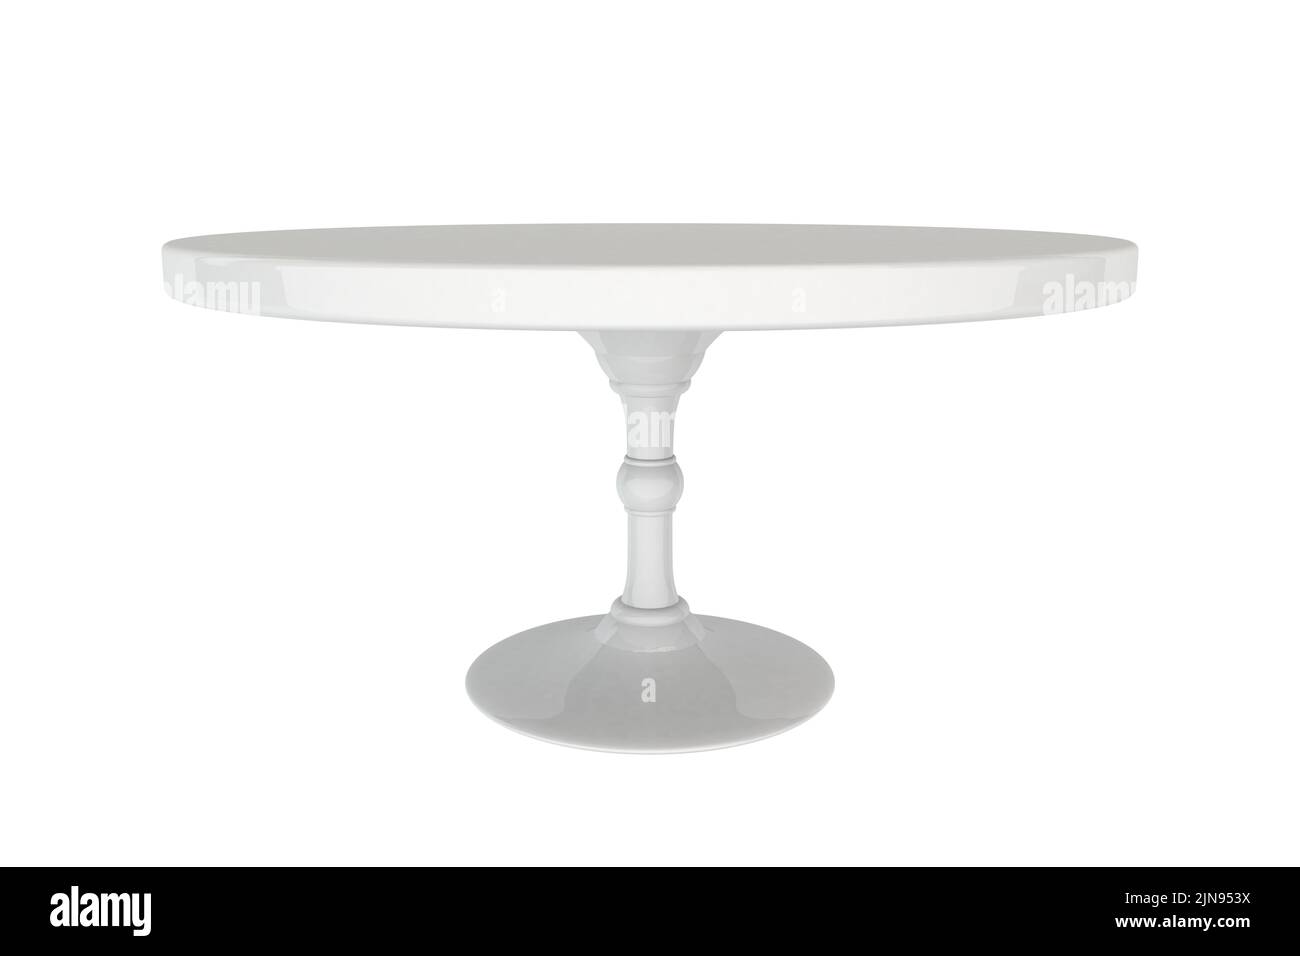 Empty cake stand isolated on a white background. 3d rendering Stock Photo